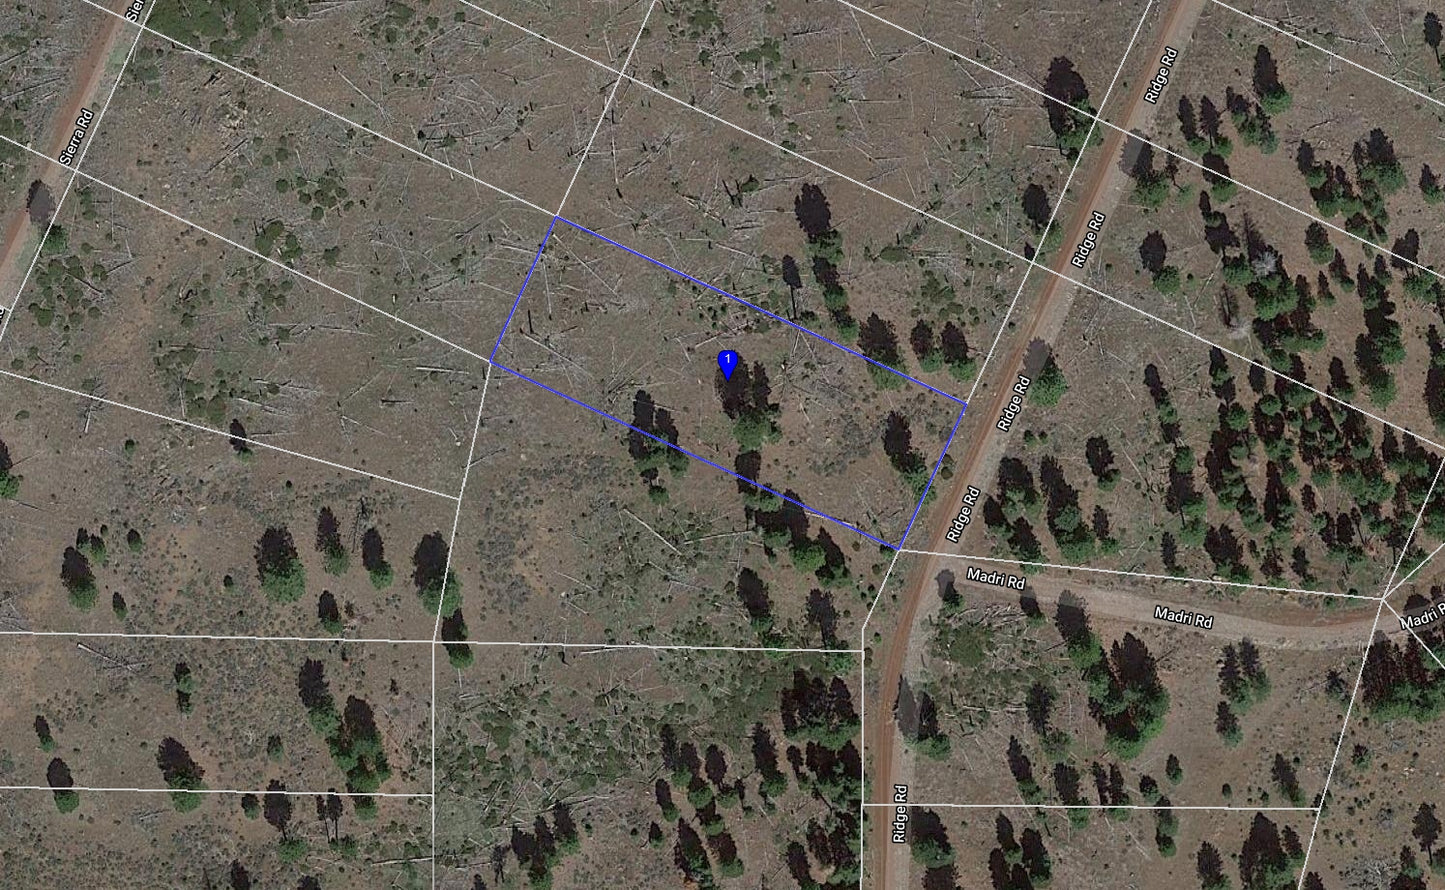 #L11172-1 0.95 Acres in California Pines, Modoc County, CA $6,299.00 ($120.25/Month)